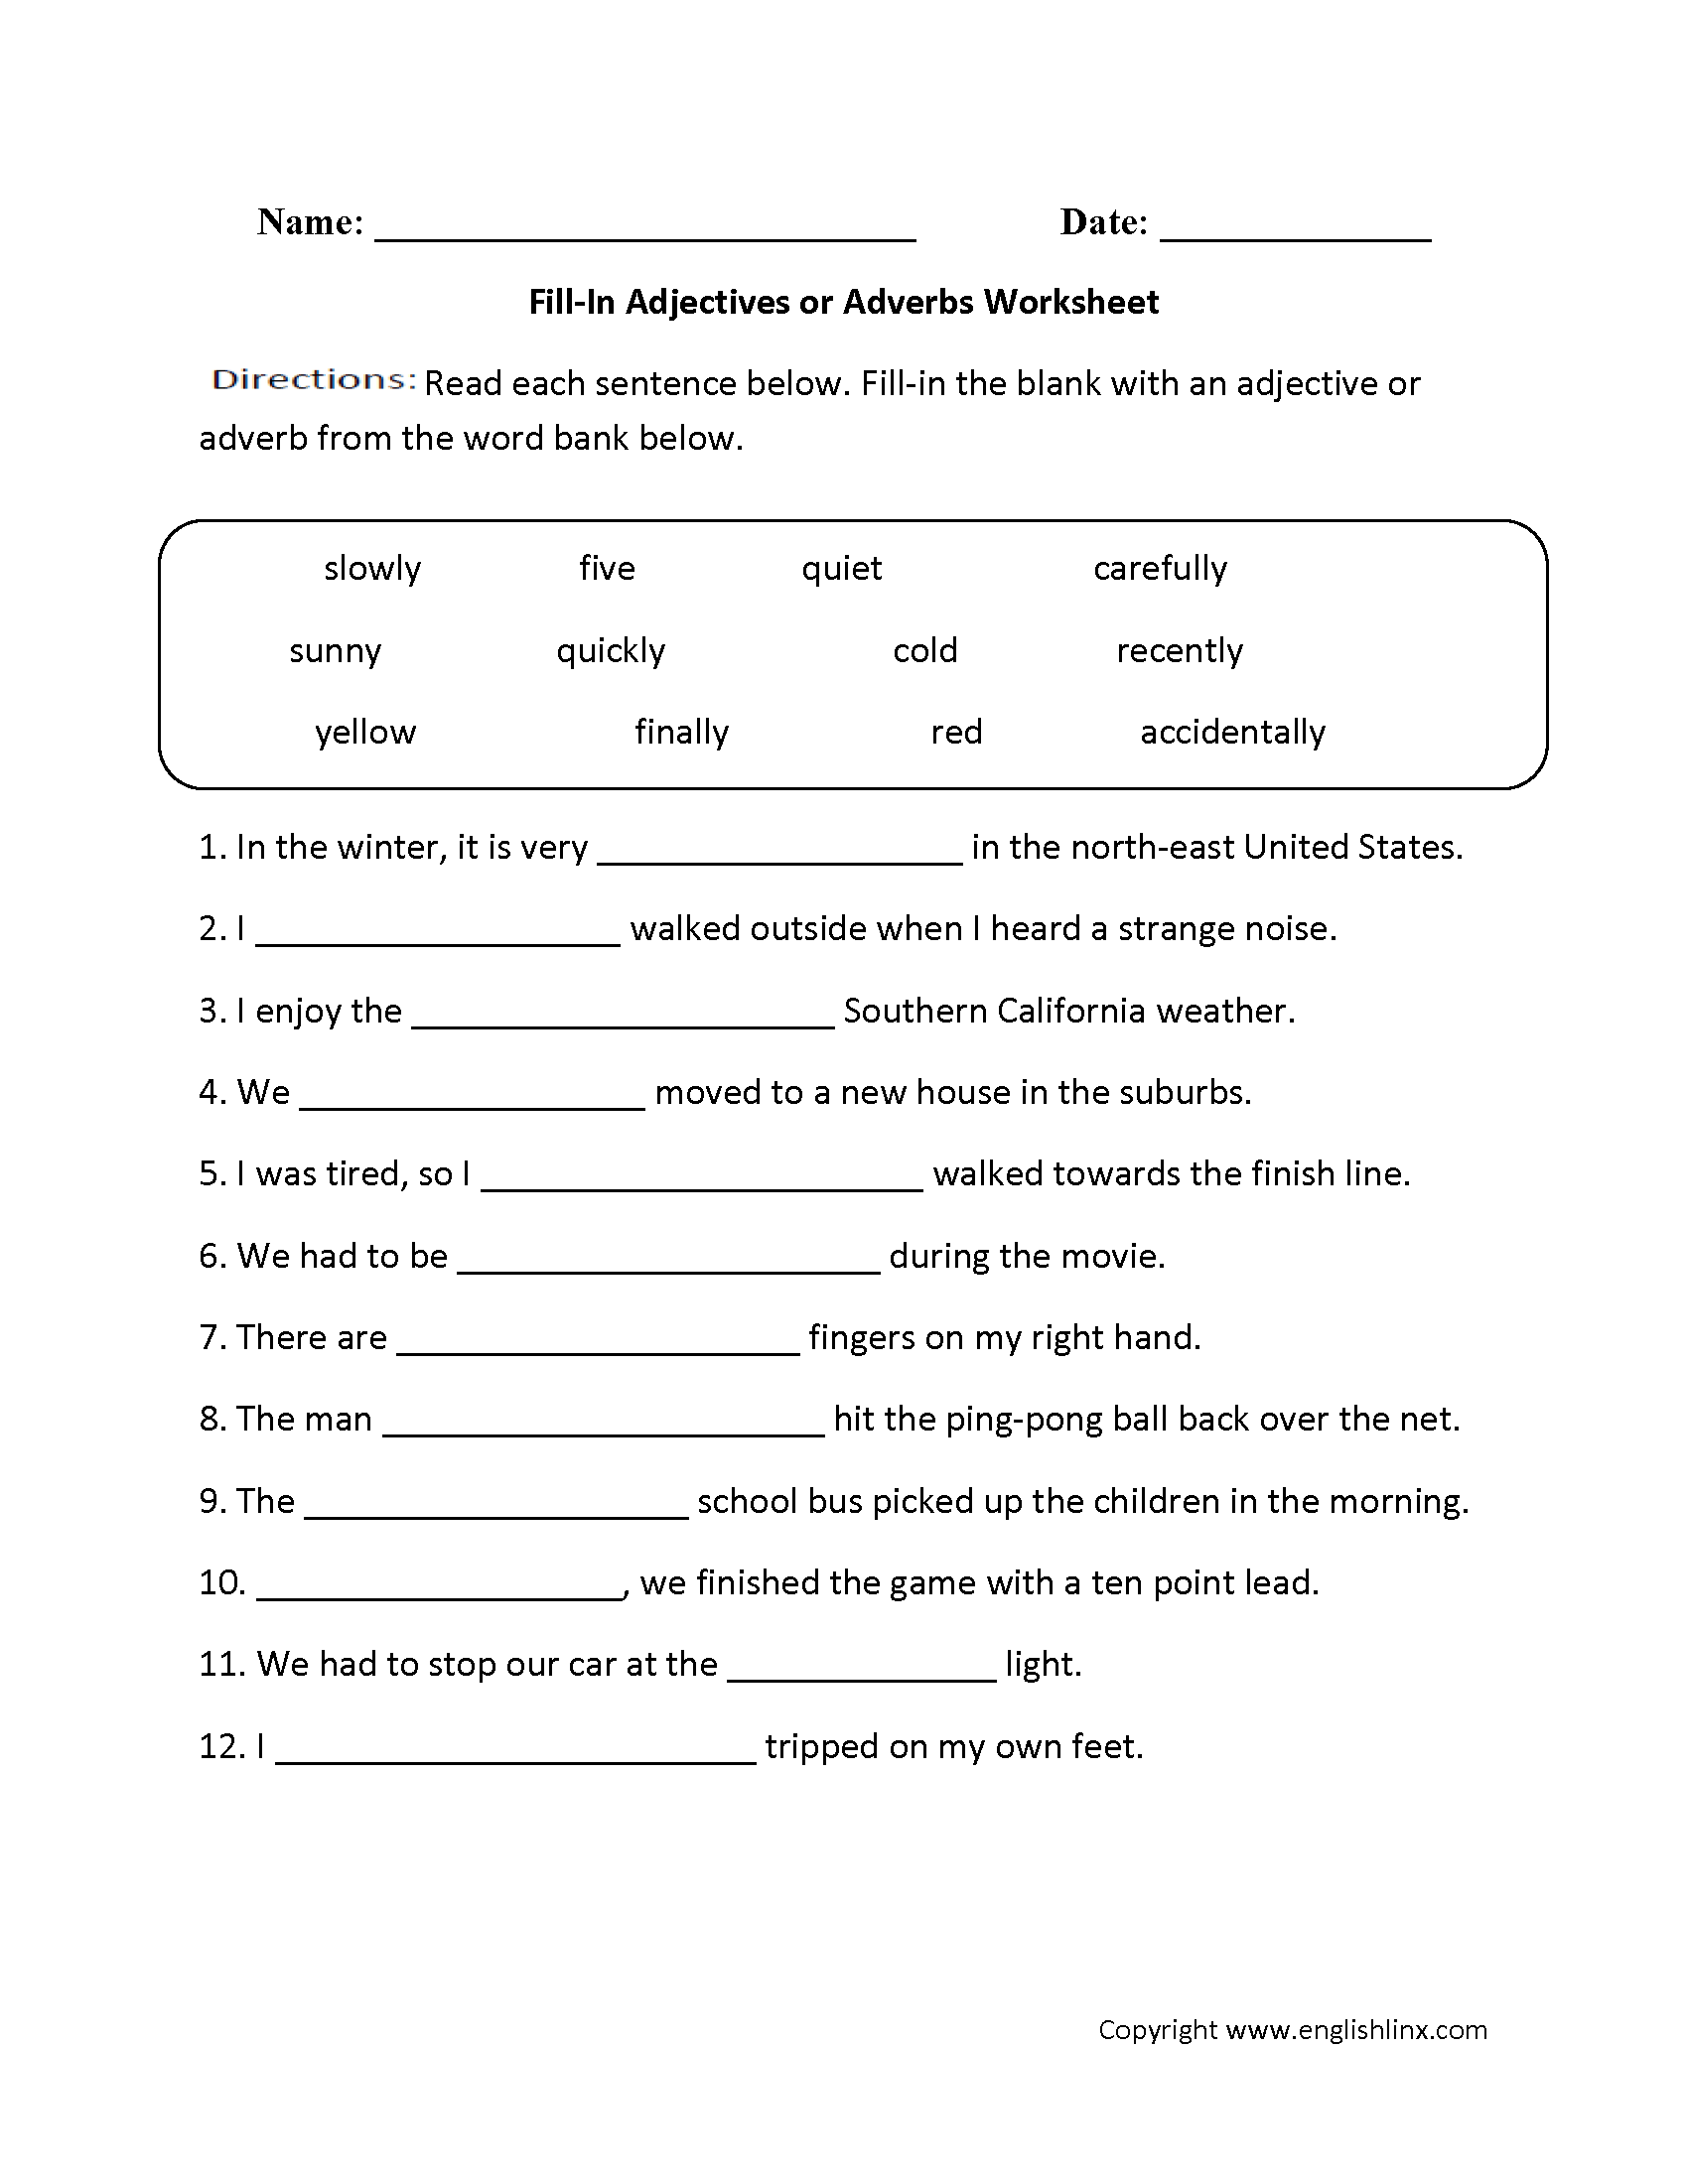 Fill-In Adjectives or Adverbs Worksheet